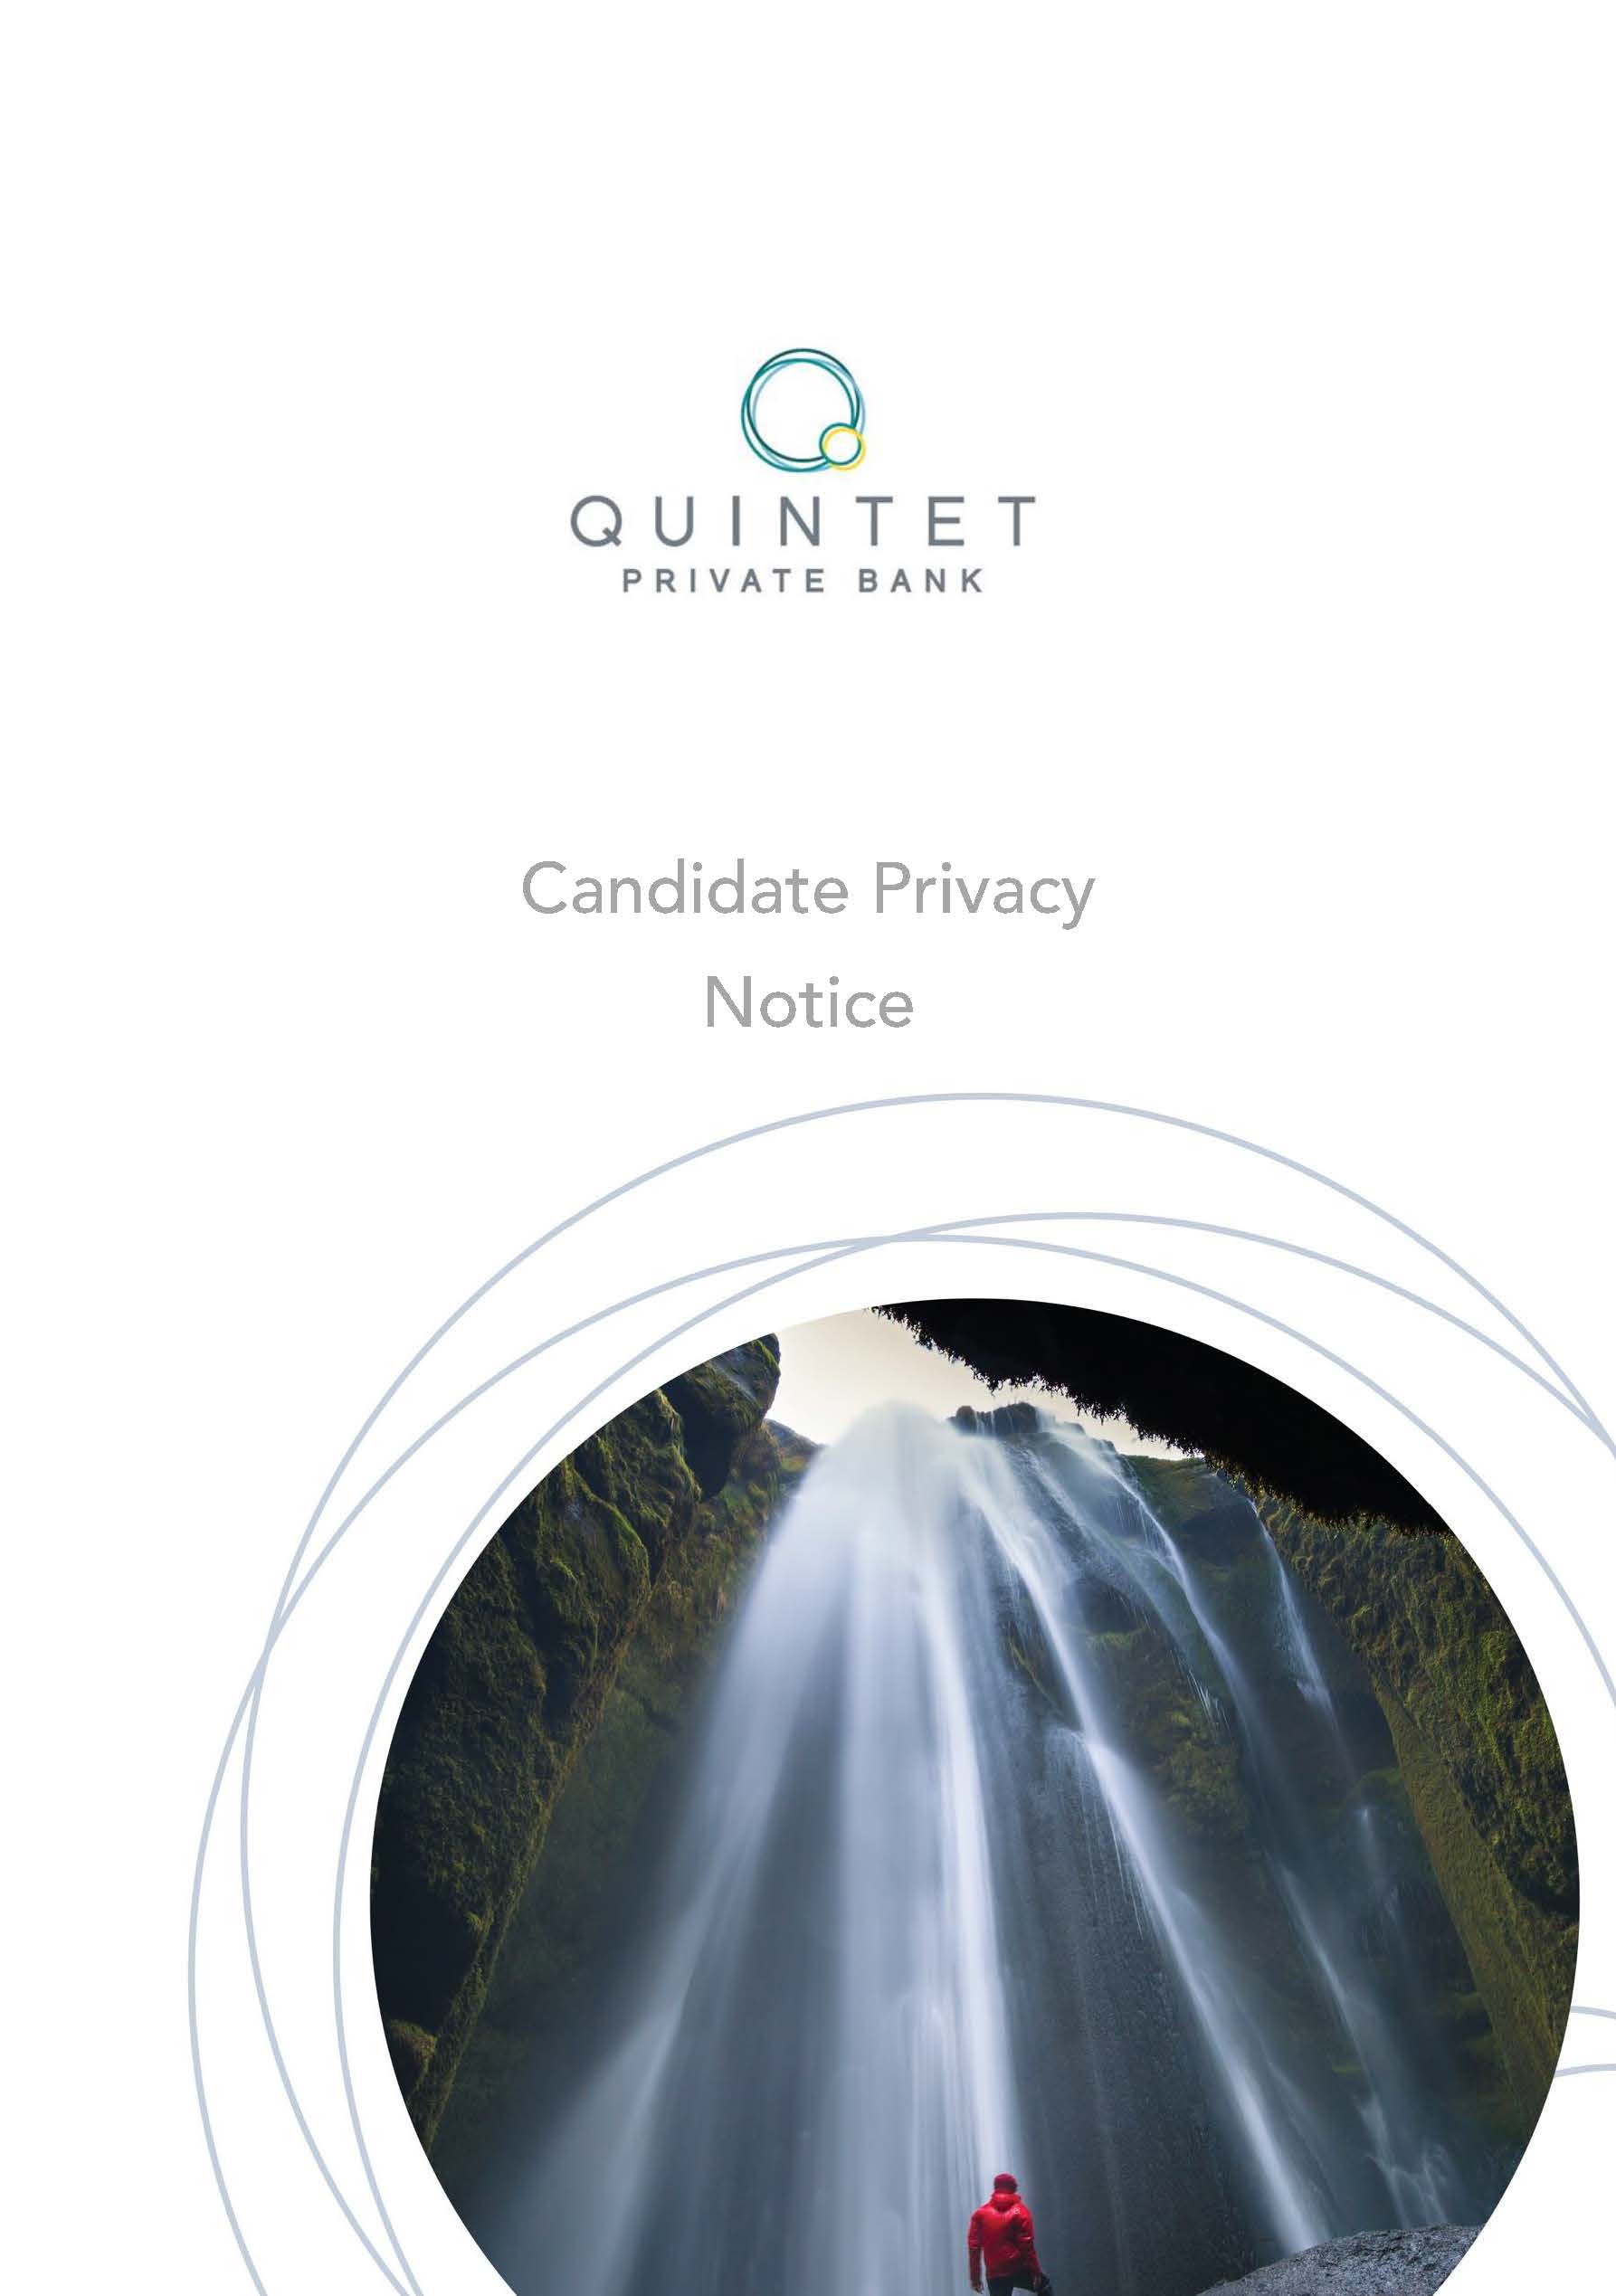 Candidate privacy notice